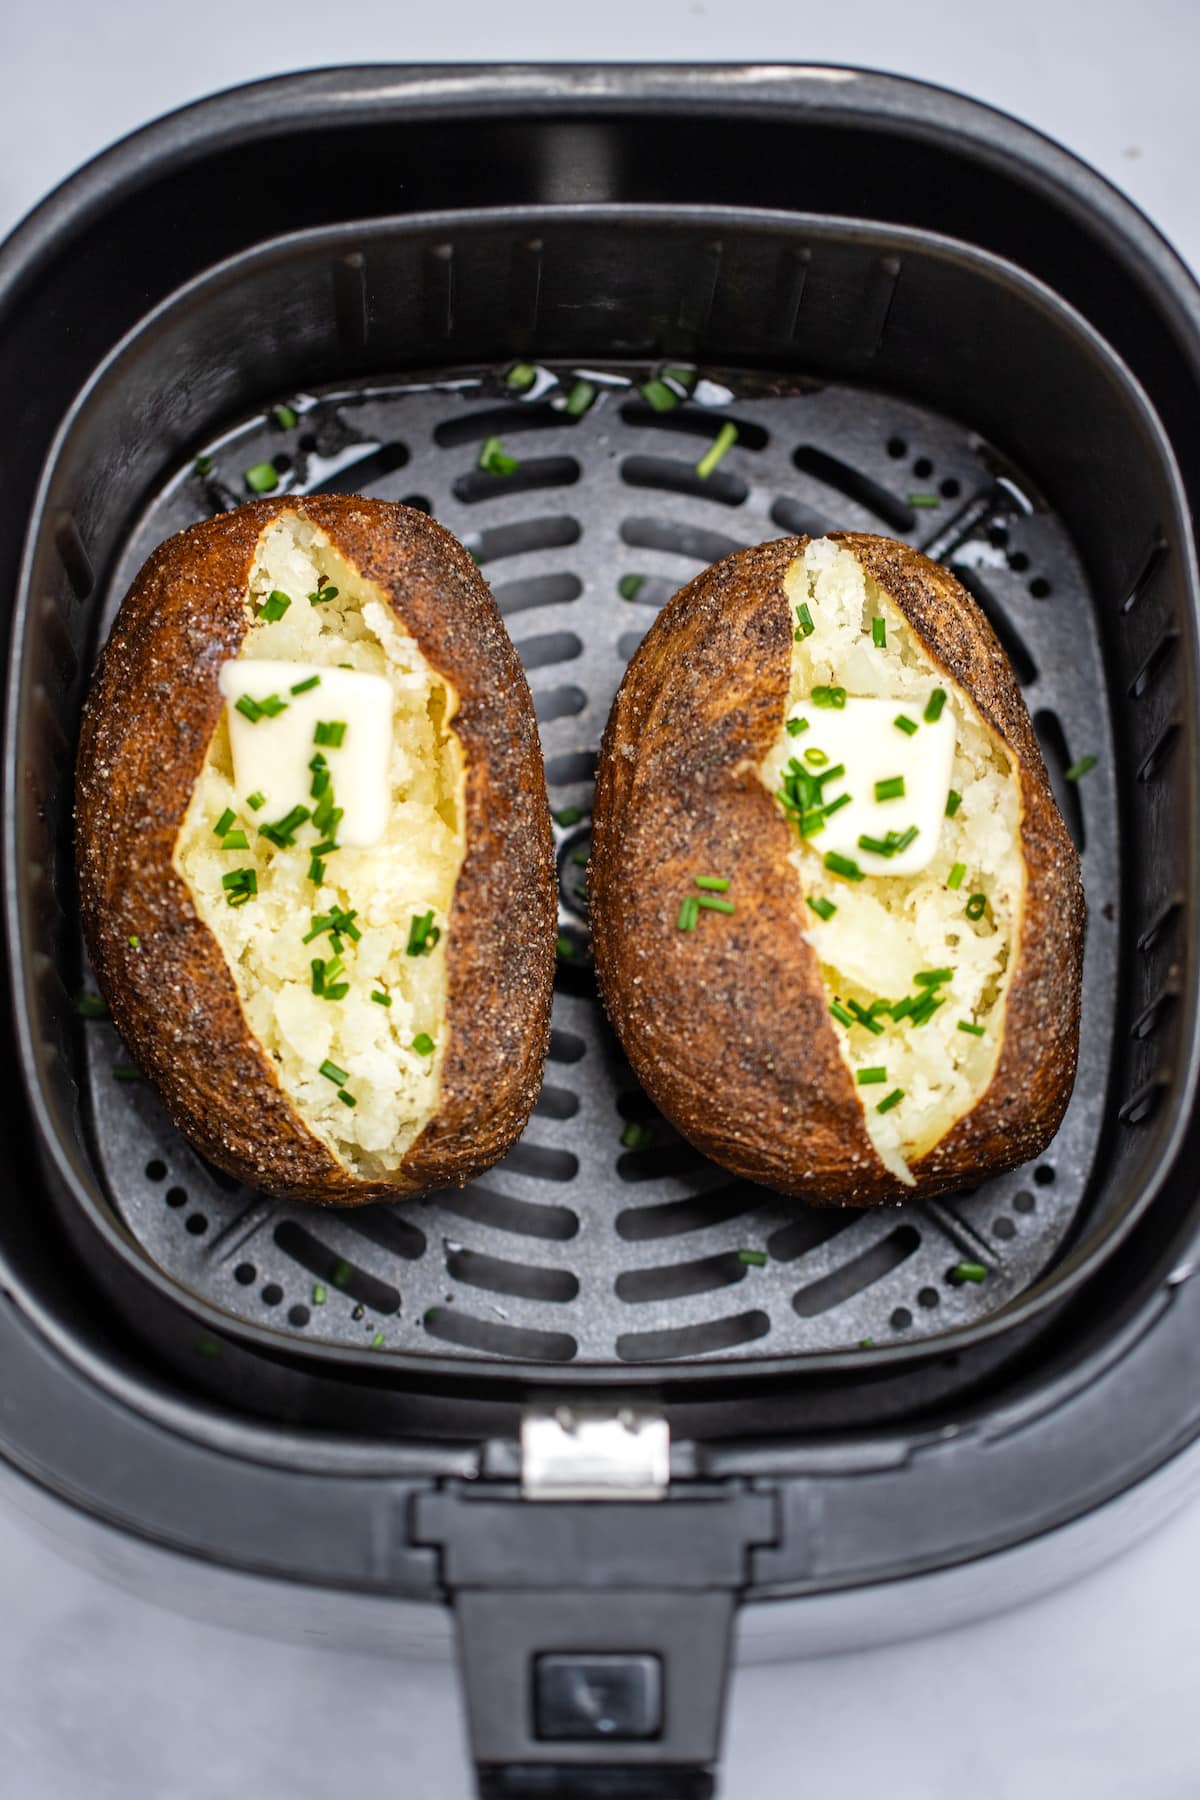 Two fully cooked baked potatoes topped with butter, chives, and sour cream sitting in an air fryer basket.